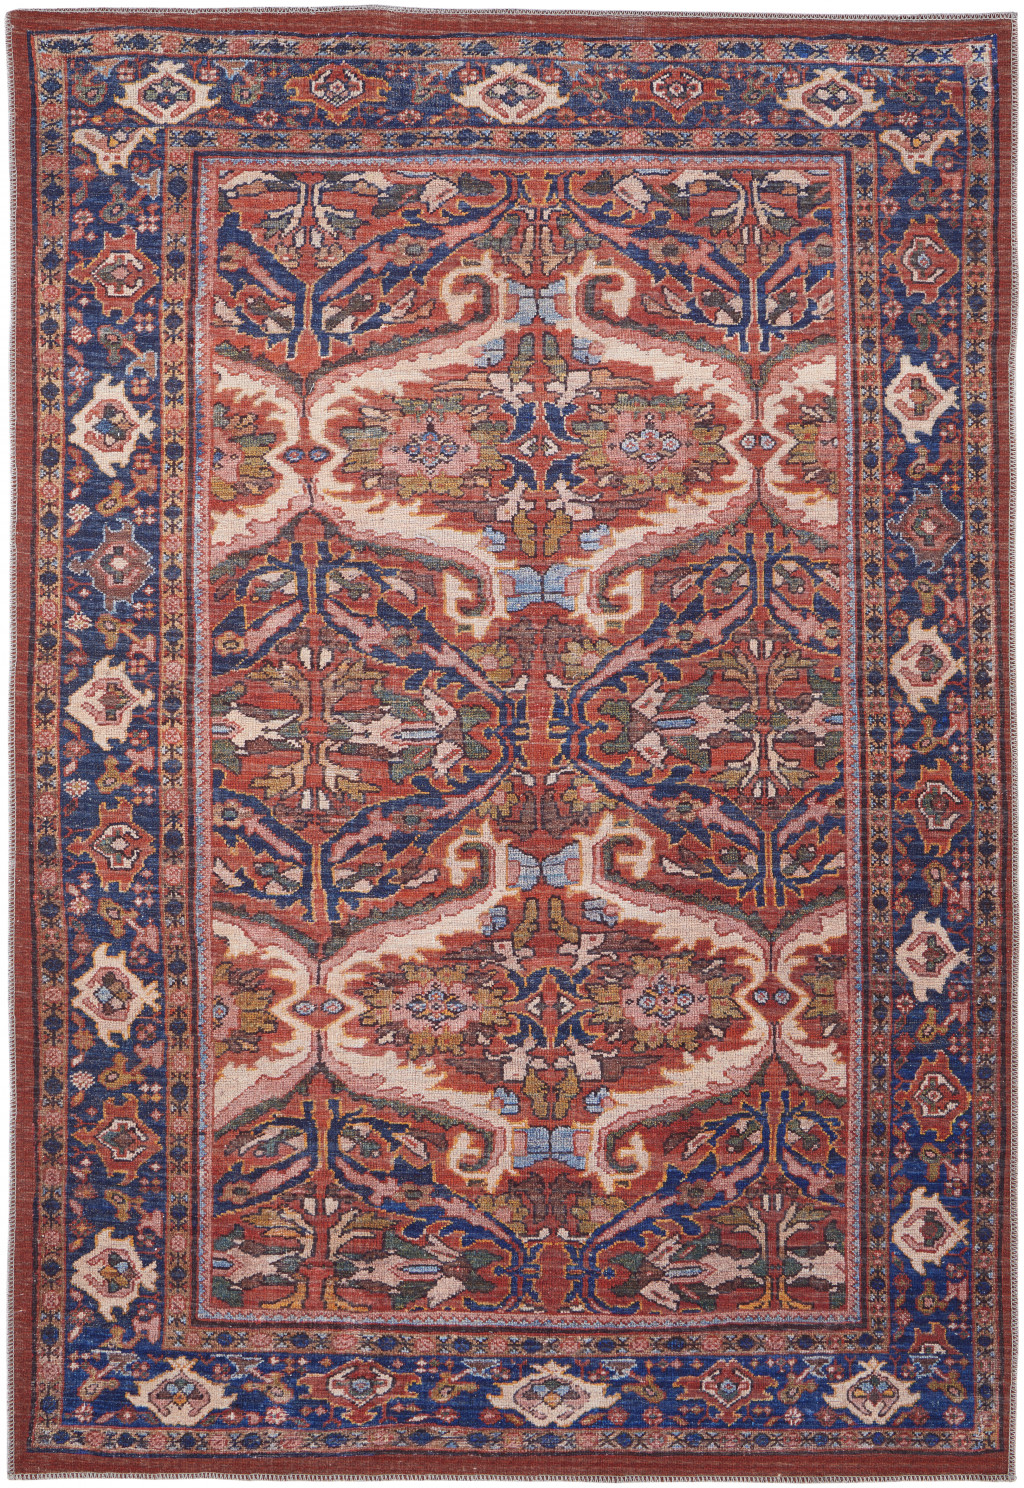 2' X 3' Red Tan And Blue Floral Power Loom Area Rug-515153-1